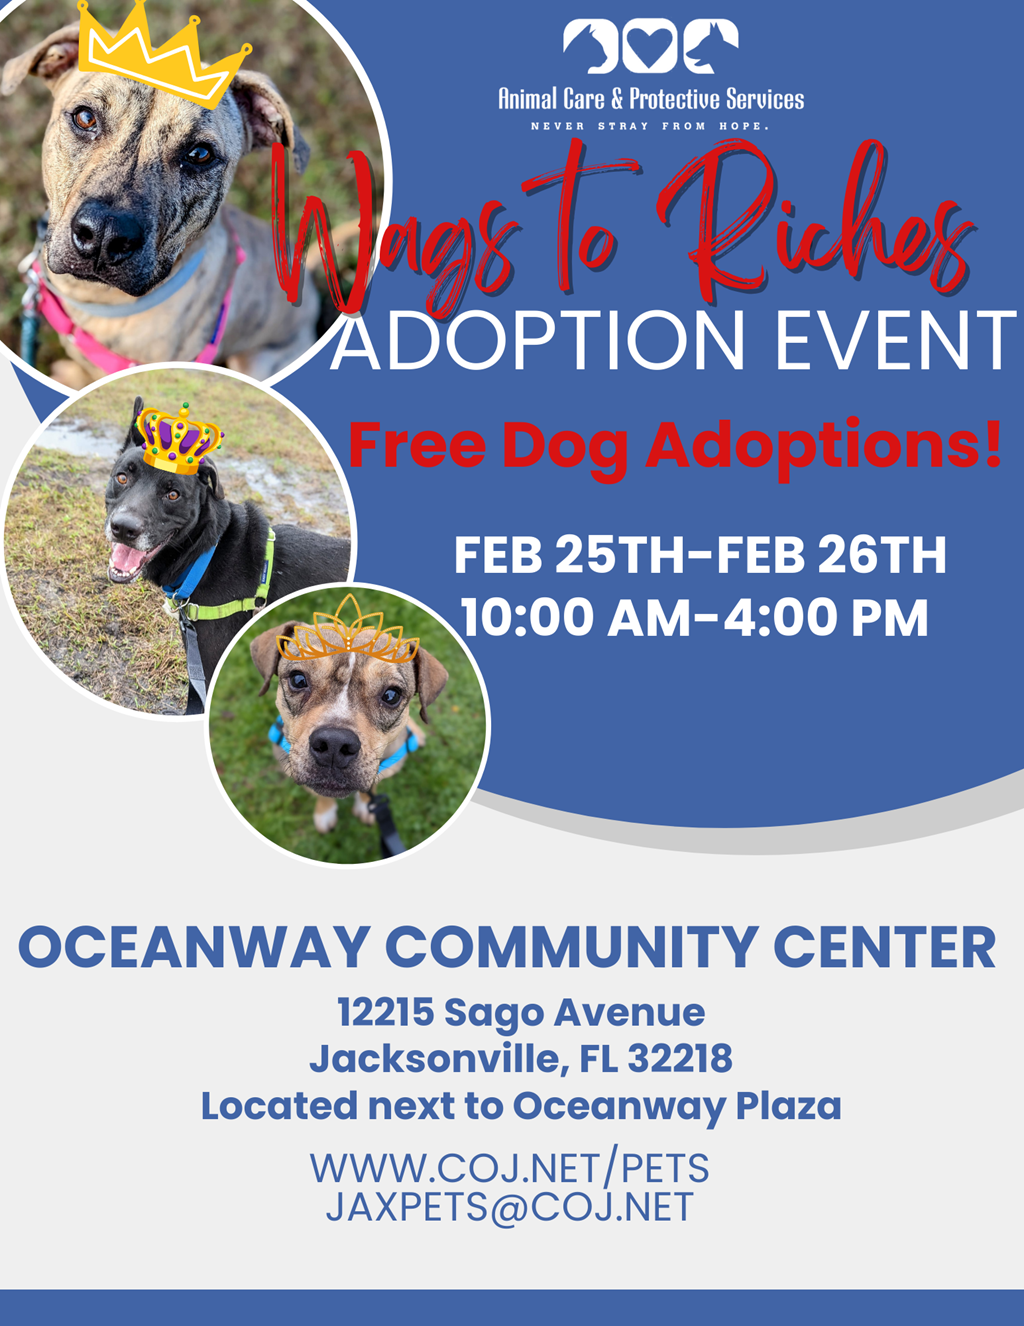 Wags to Riches Adoption Event Flyer